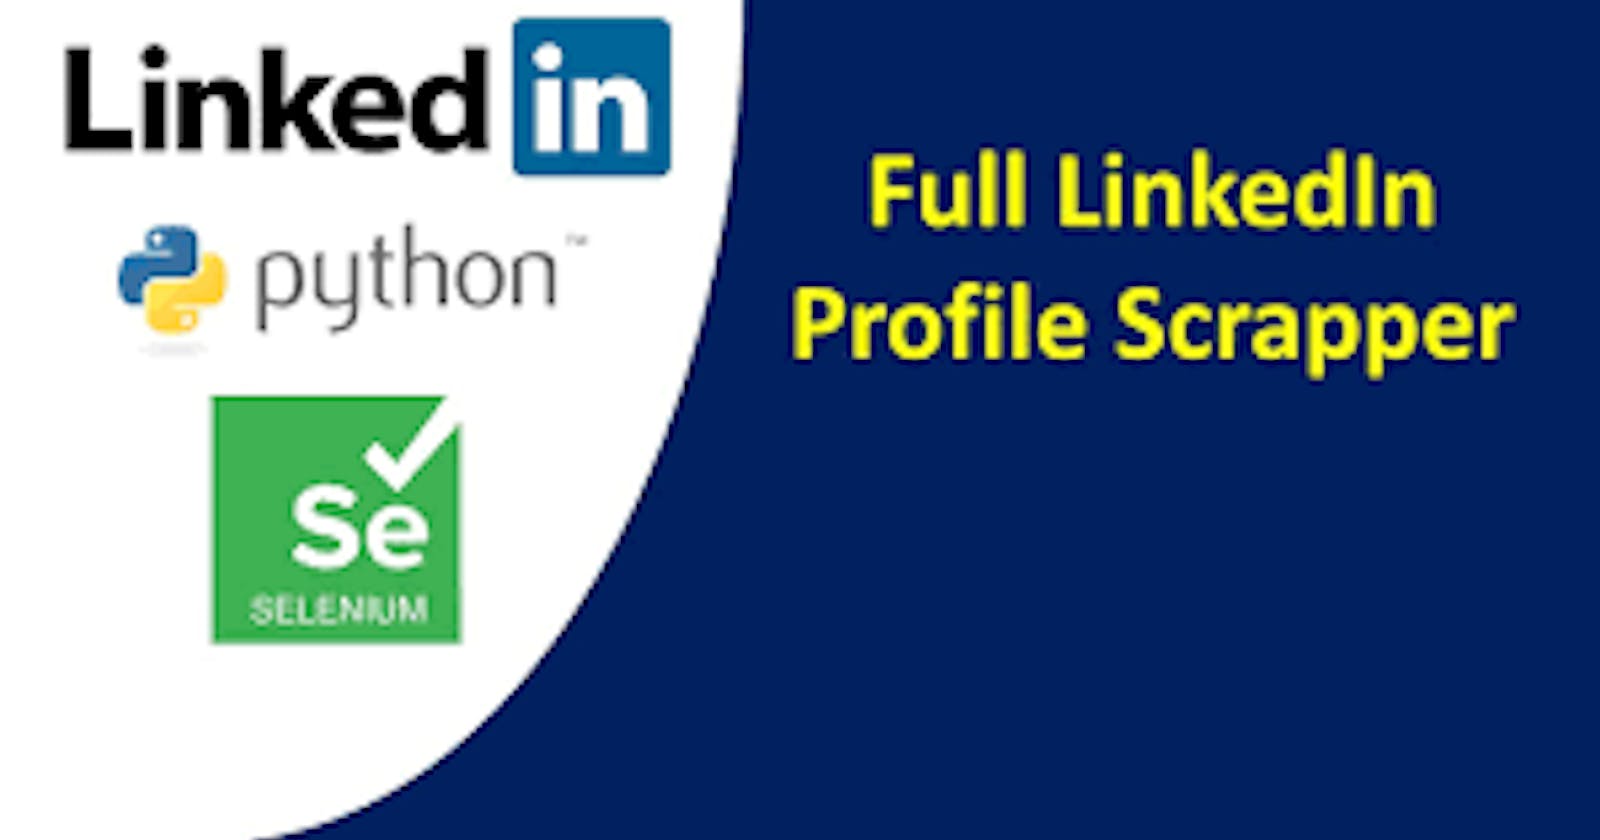 Tutorial - How to build your own LinkedIn Profile Scrapper in 2022